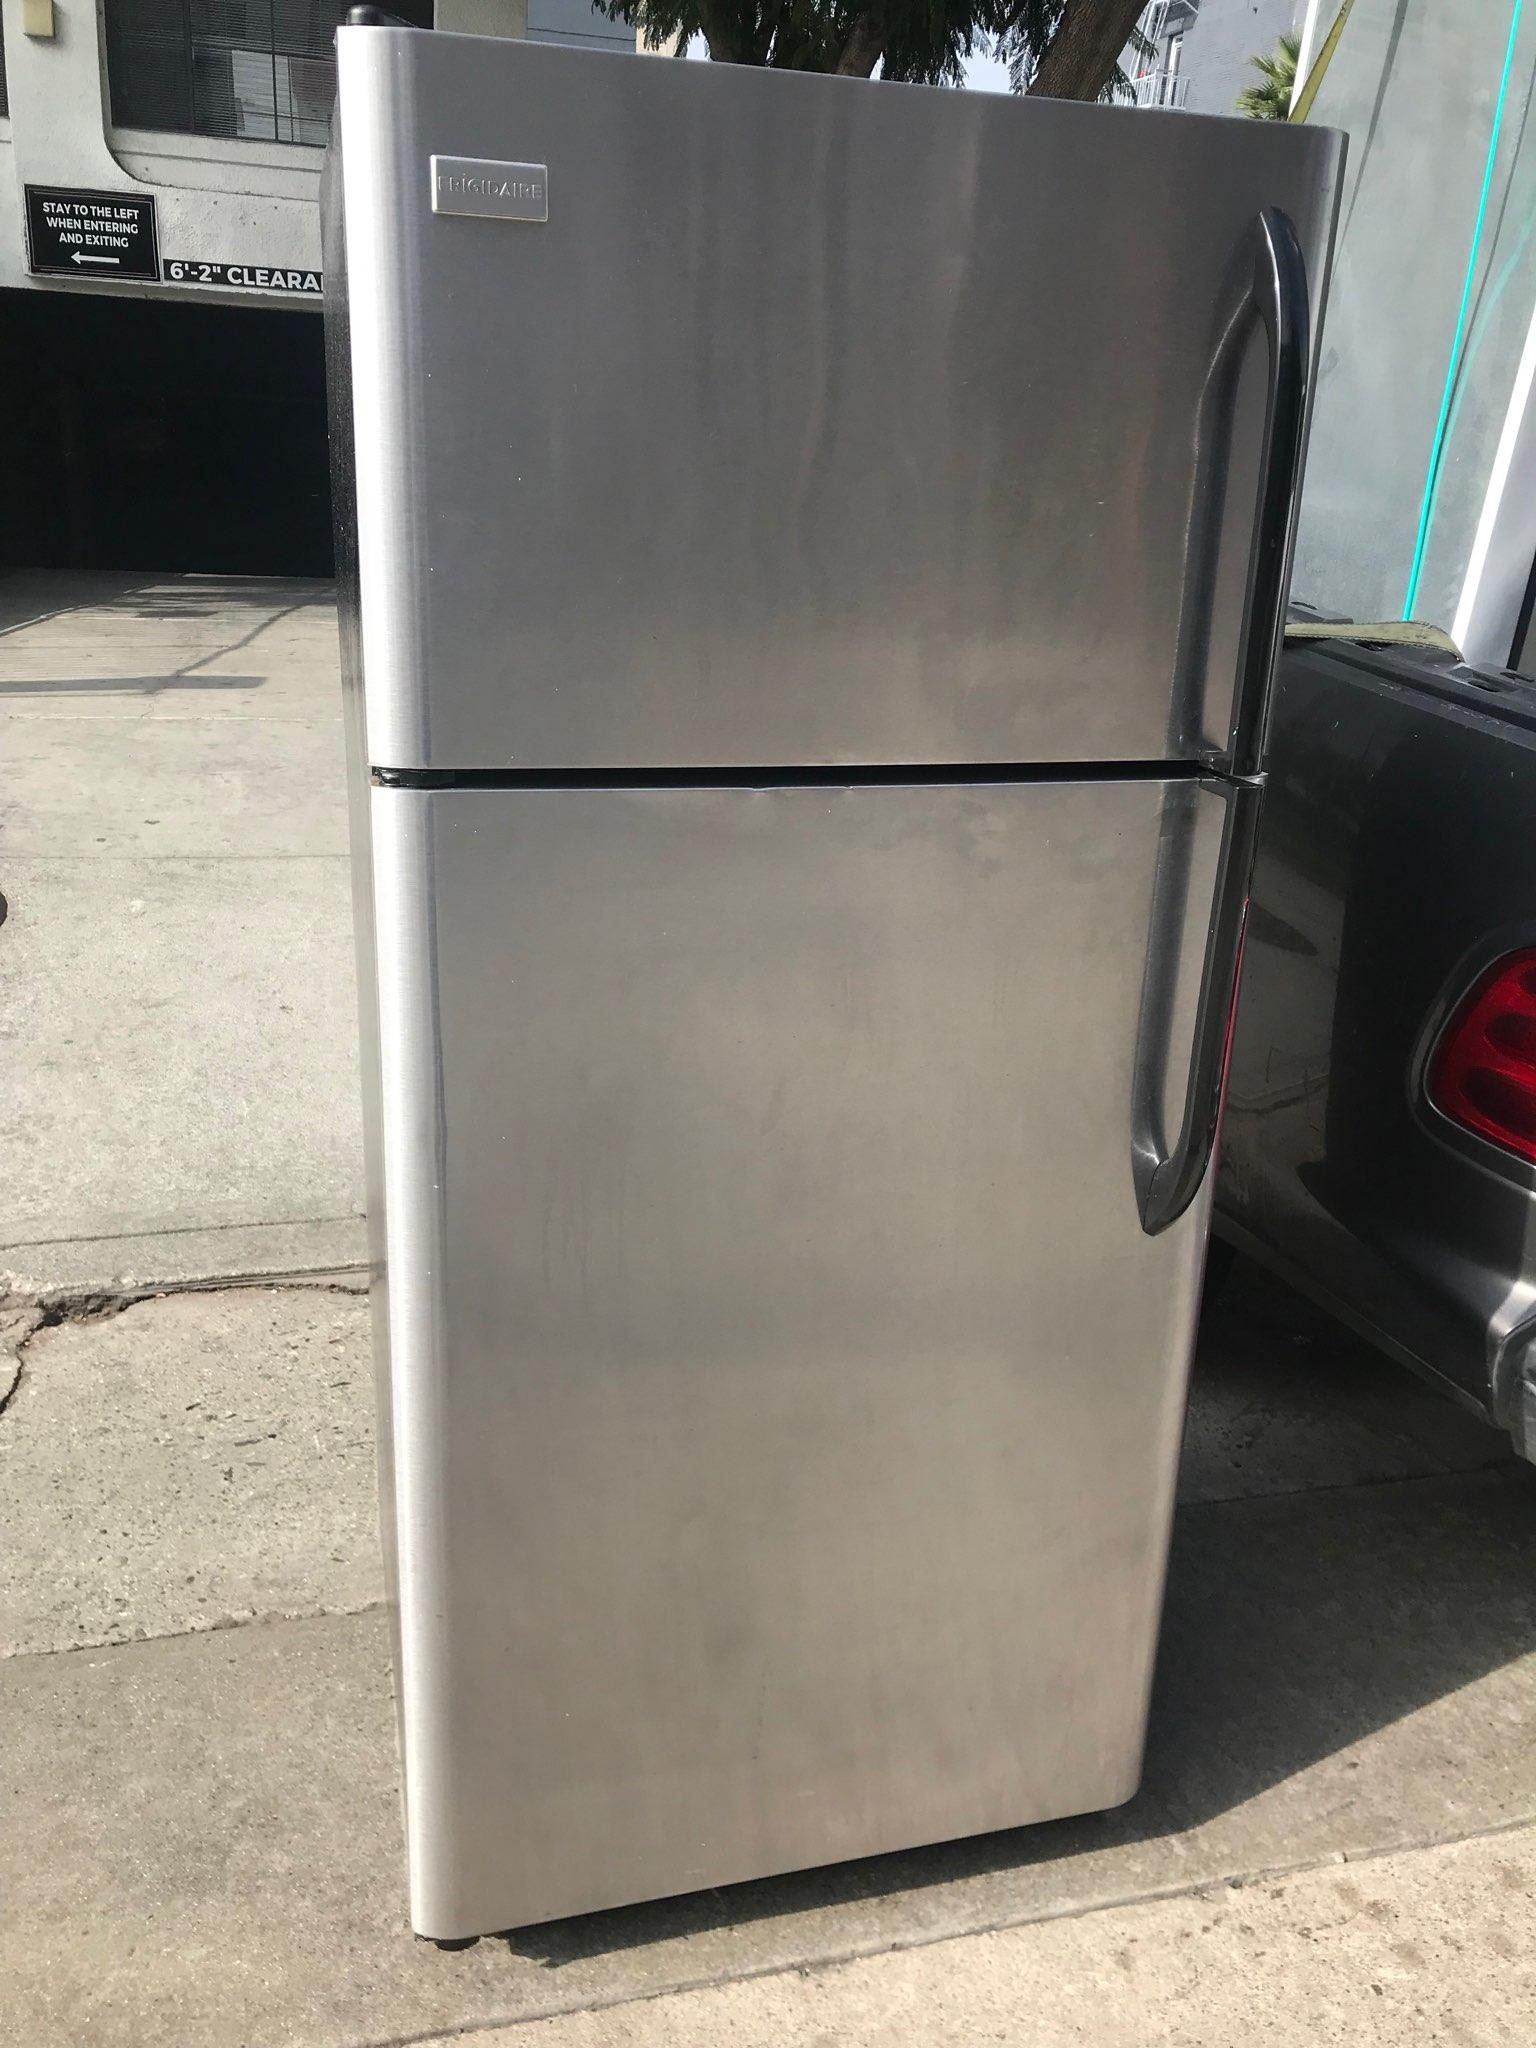 $275 Frigidaire stainless 18 cubic fridge includes delivery in the San Fernando Valley a warranty and installation